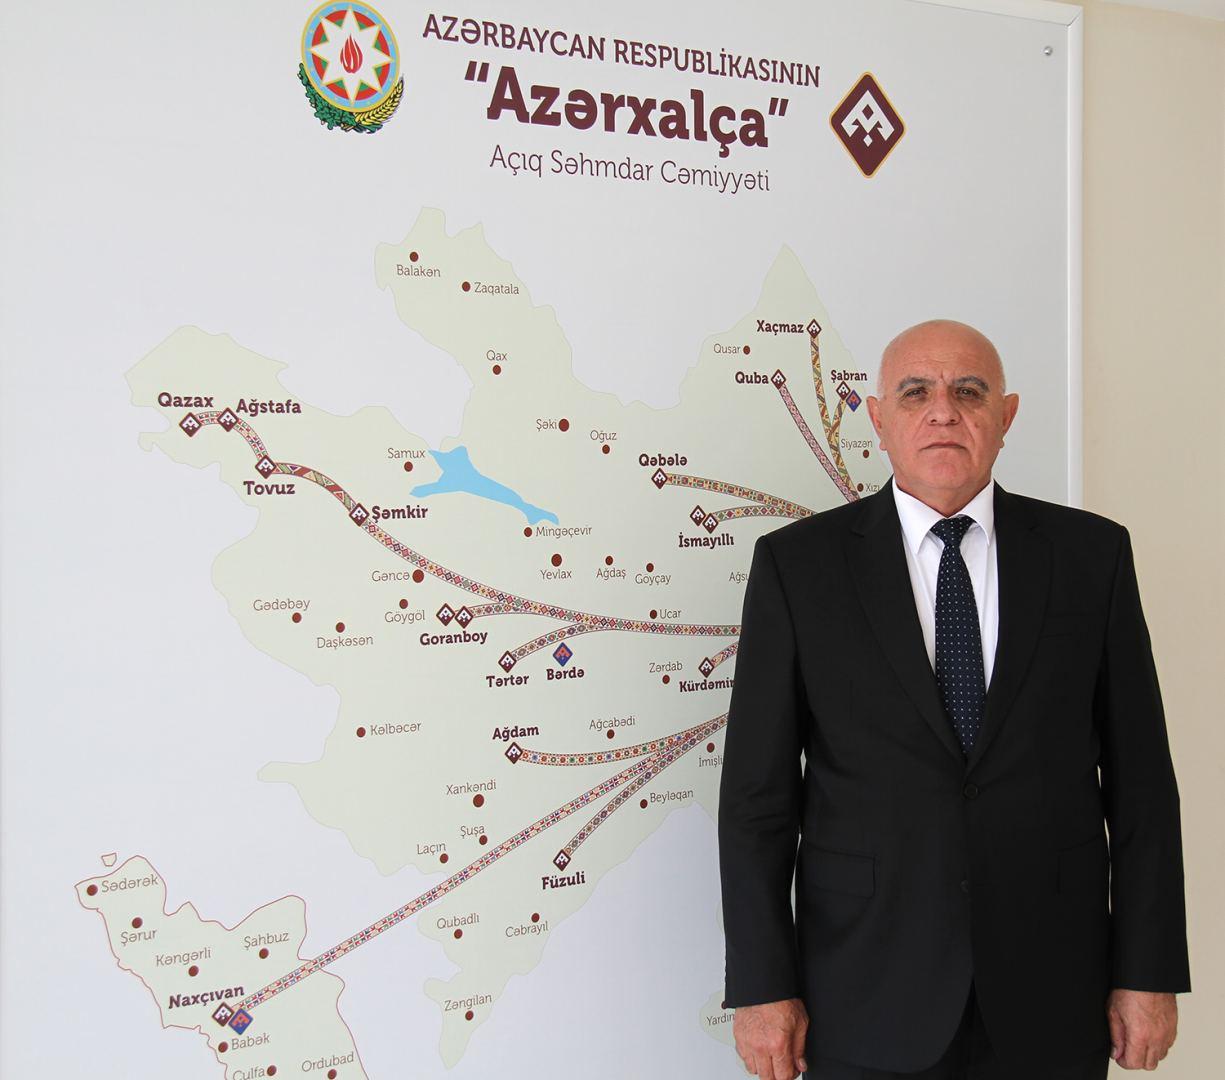 Armenians' attempt to appropriate Karabakh carpets by falsifying history - part of another insidious plan